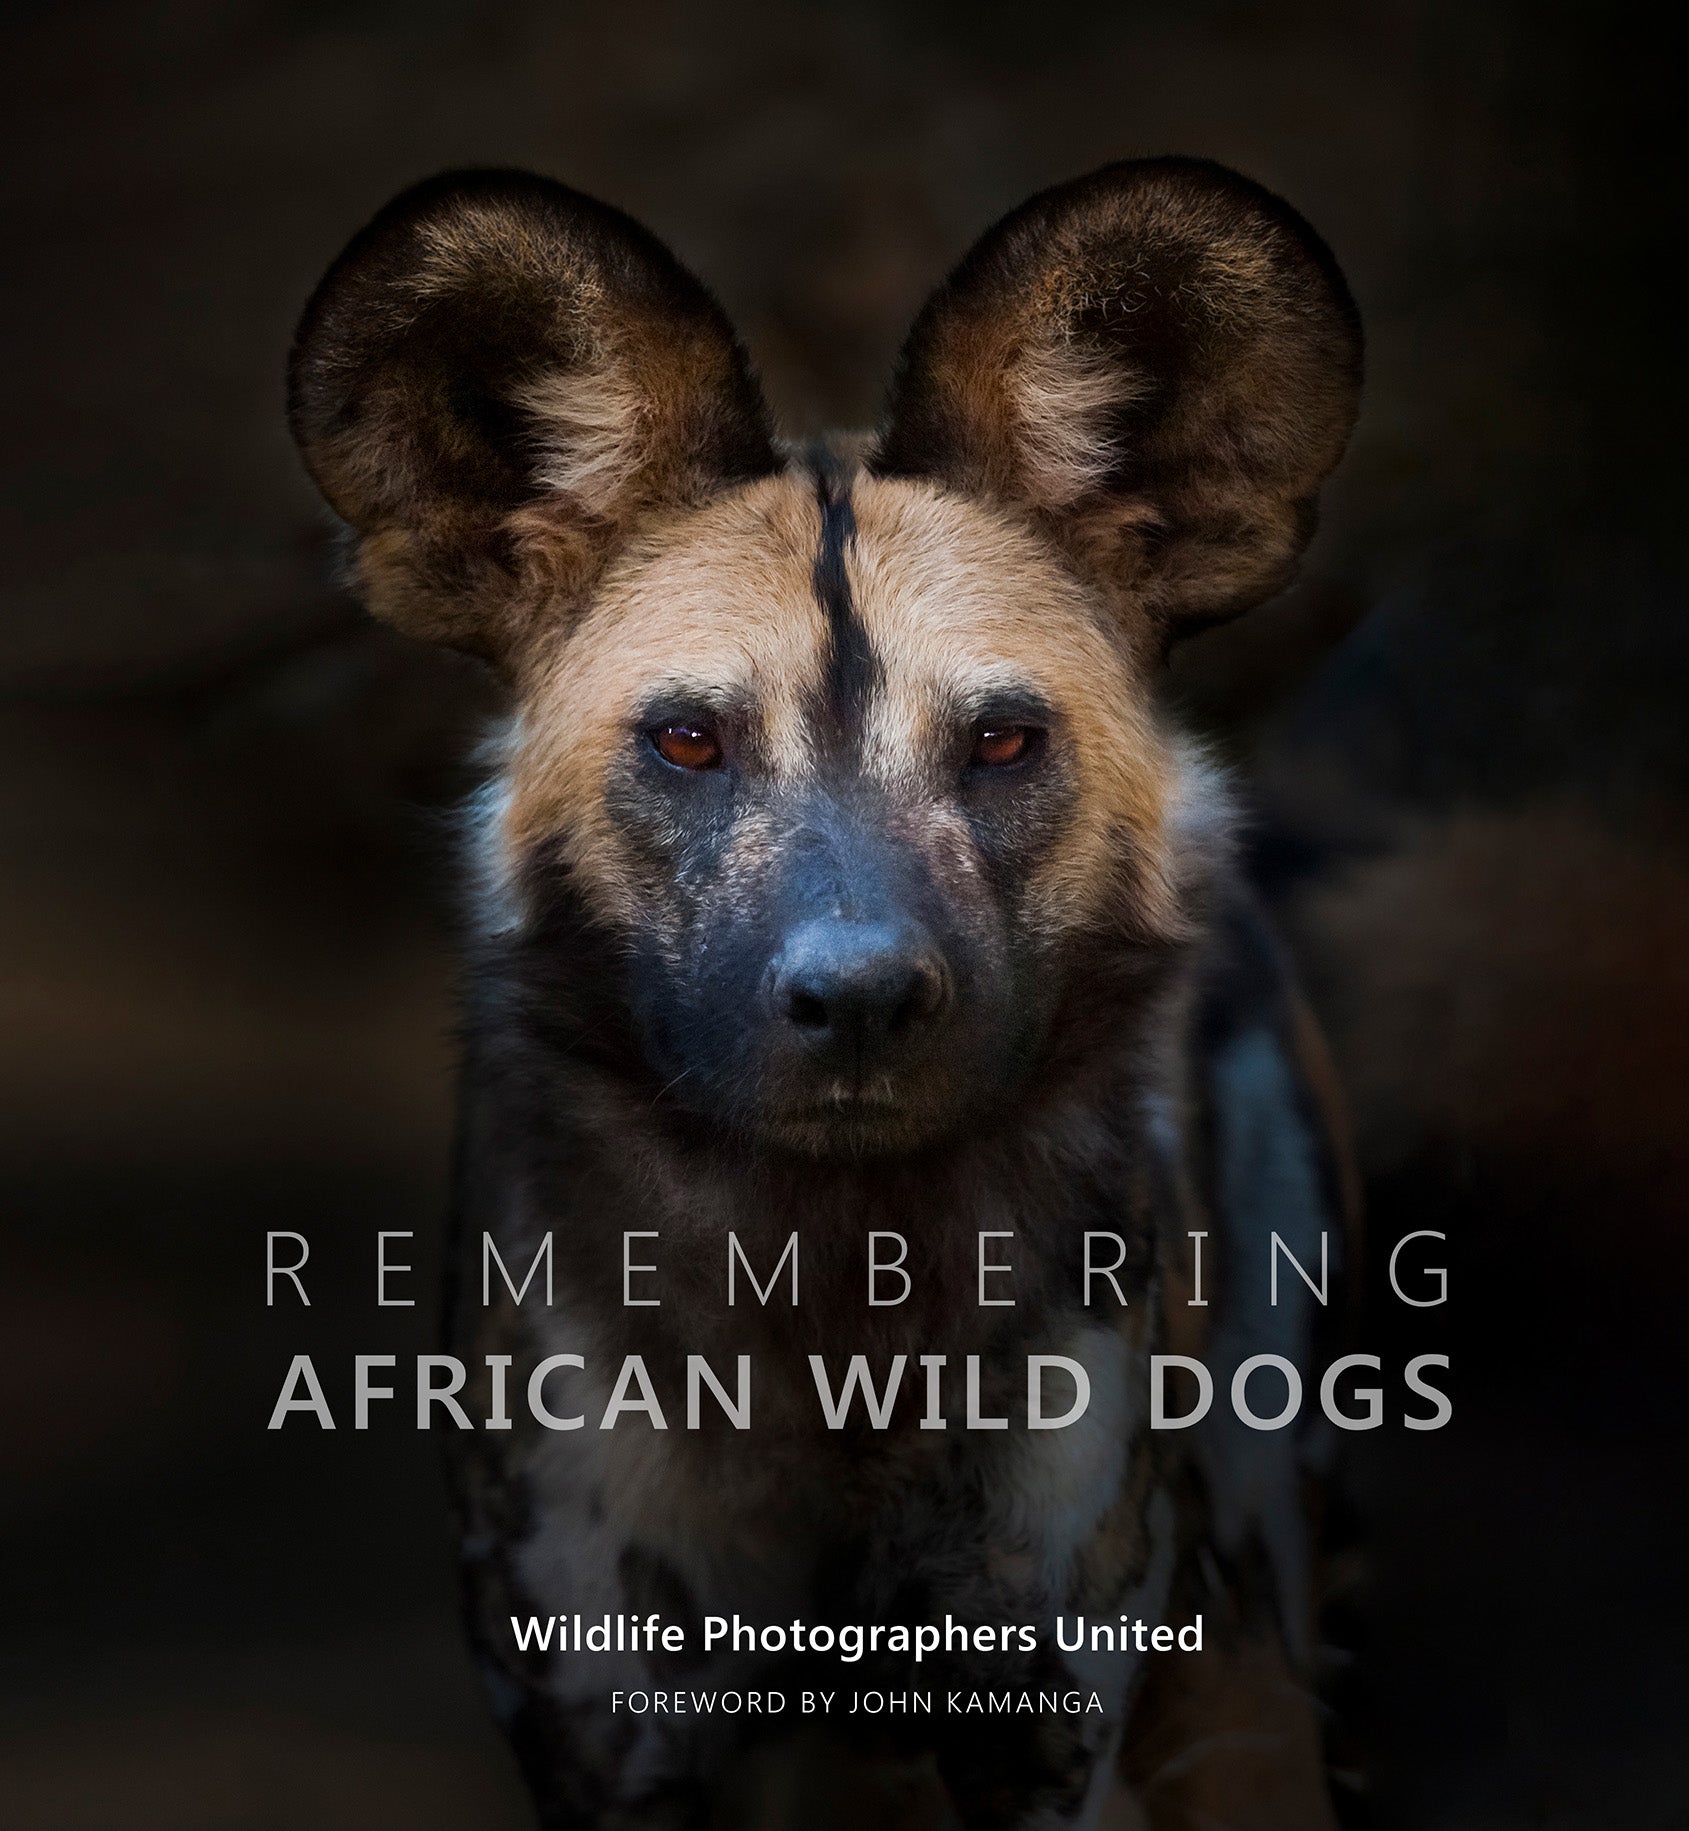 Stunning images of African wild dogs feature in new book about the species